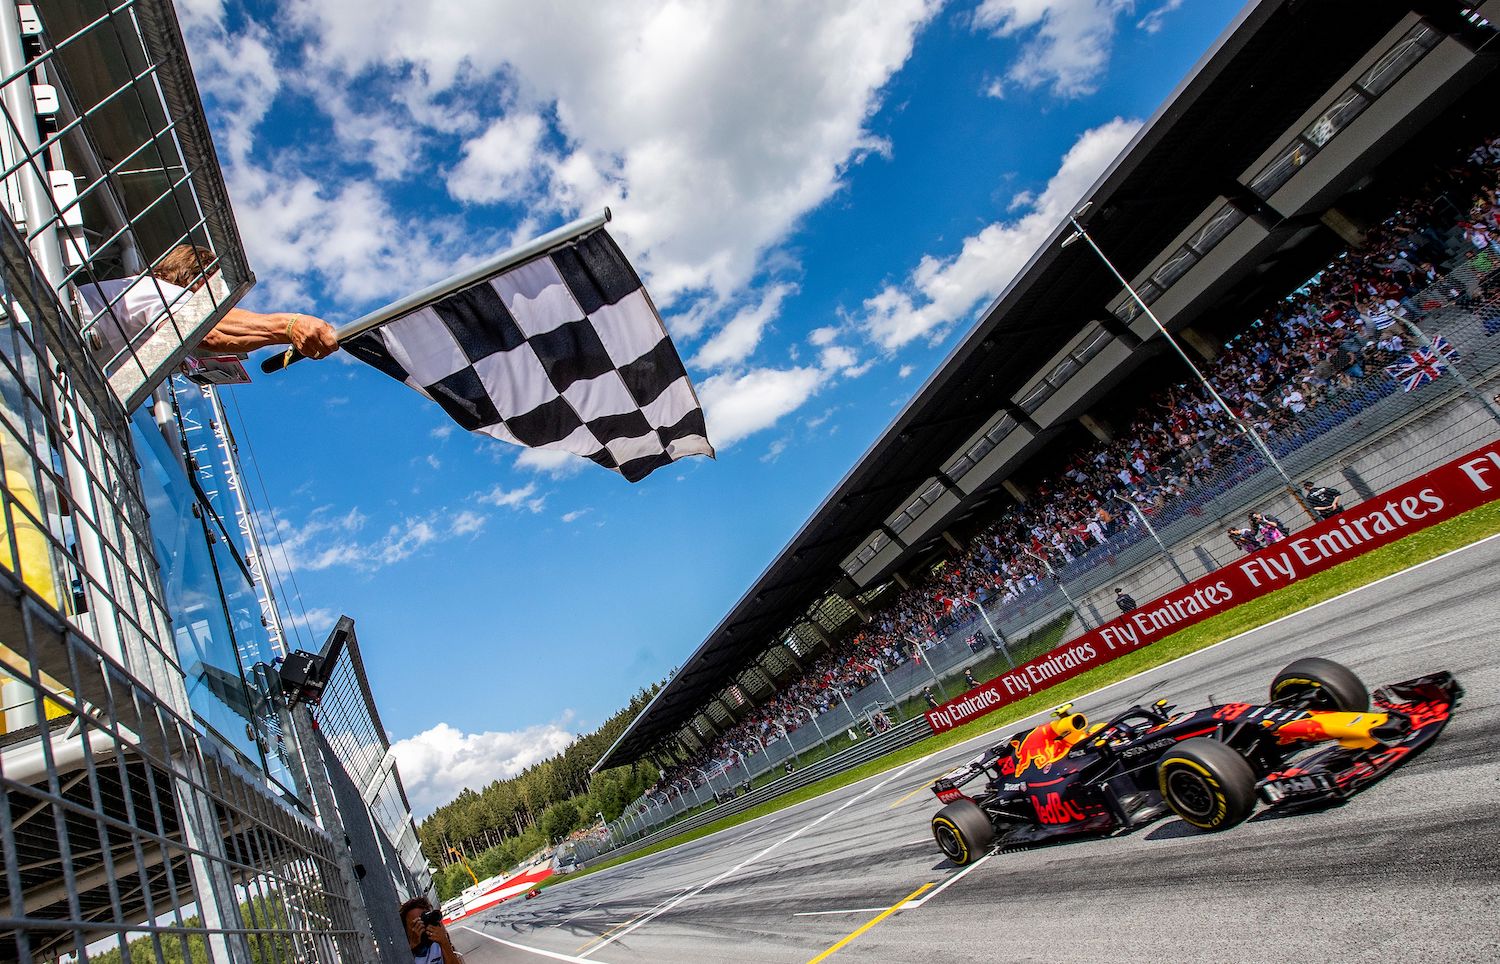 Max Verstappen leading the 2021 season in his Red Bull Honda Racing car. The Formula 1 top speed is over 200 mph. | SRDJAN SUKI/AFP via Getty Images